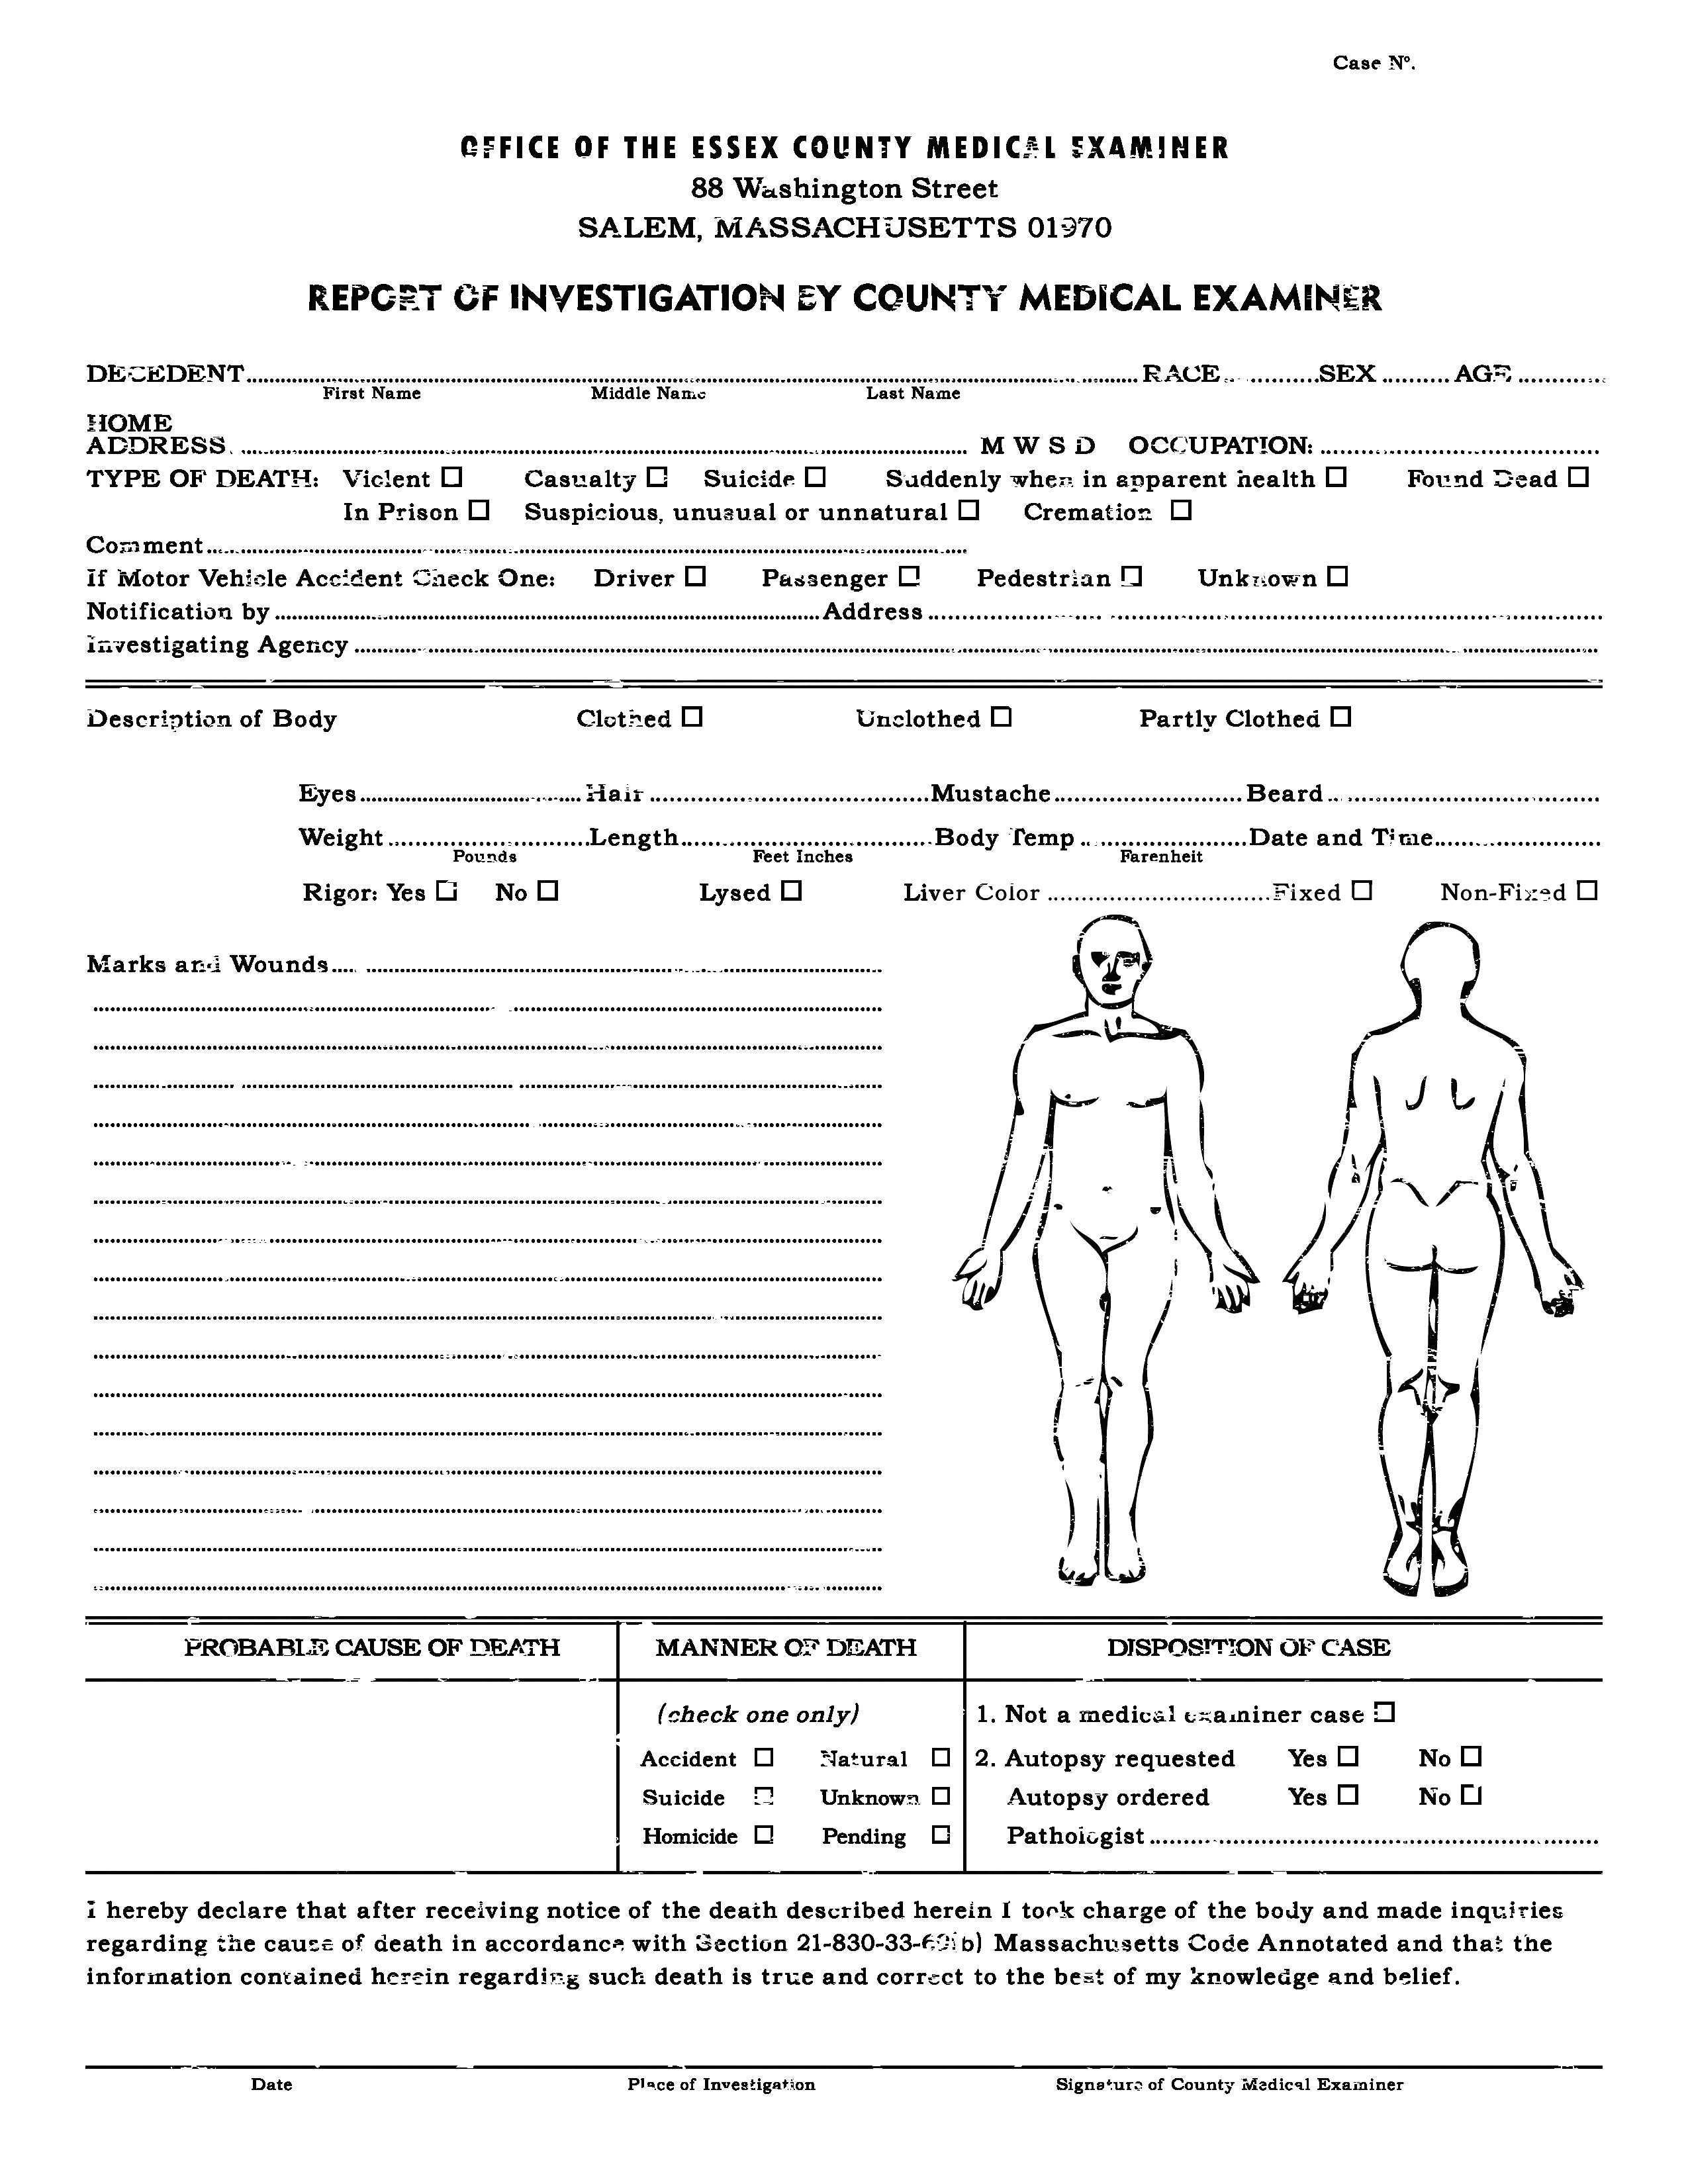 Autopsy Report Template - Atlantaauctionco For Coroner's Report Template